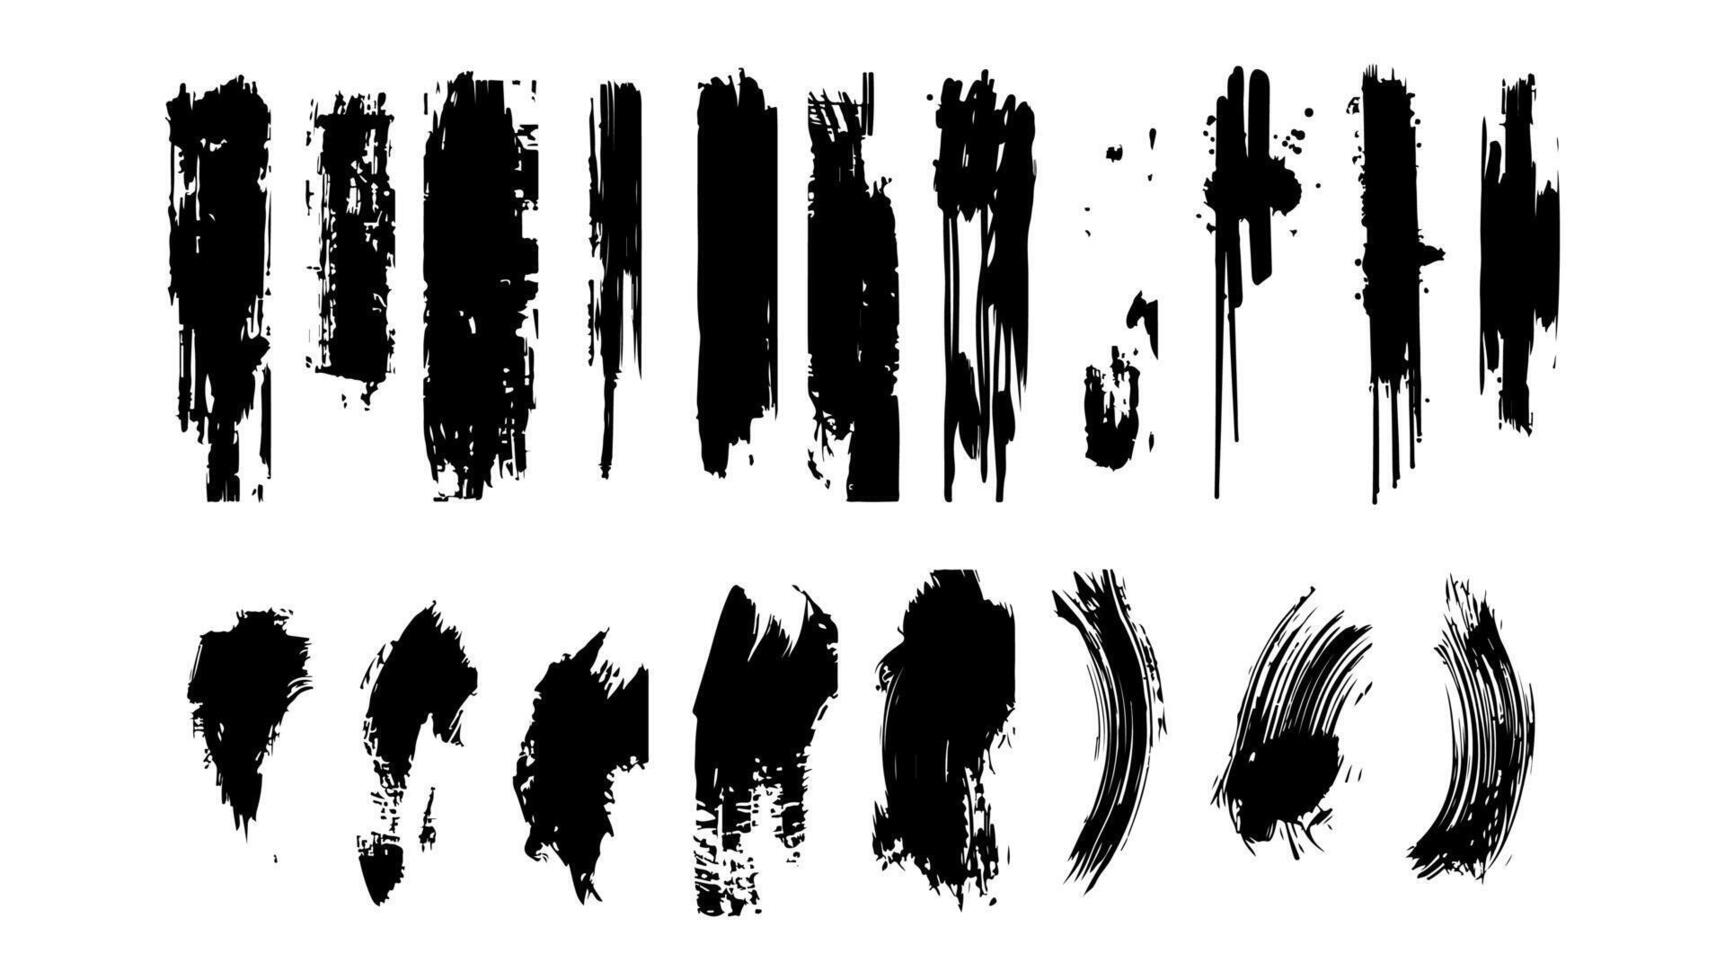 Grunge black brush strokes set illustration. Art paintbrush art and textured abstract design. Collection element pattern spray and distress sketch stroke vector